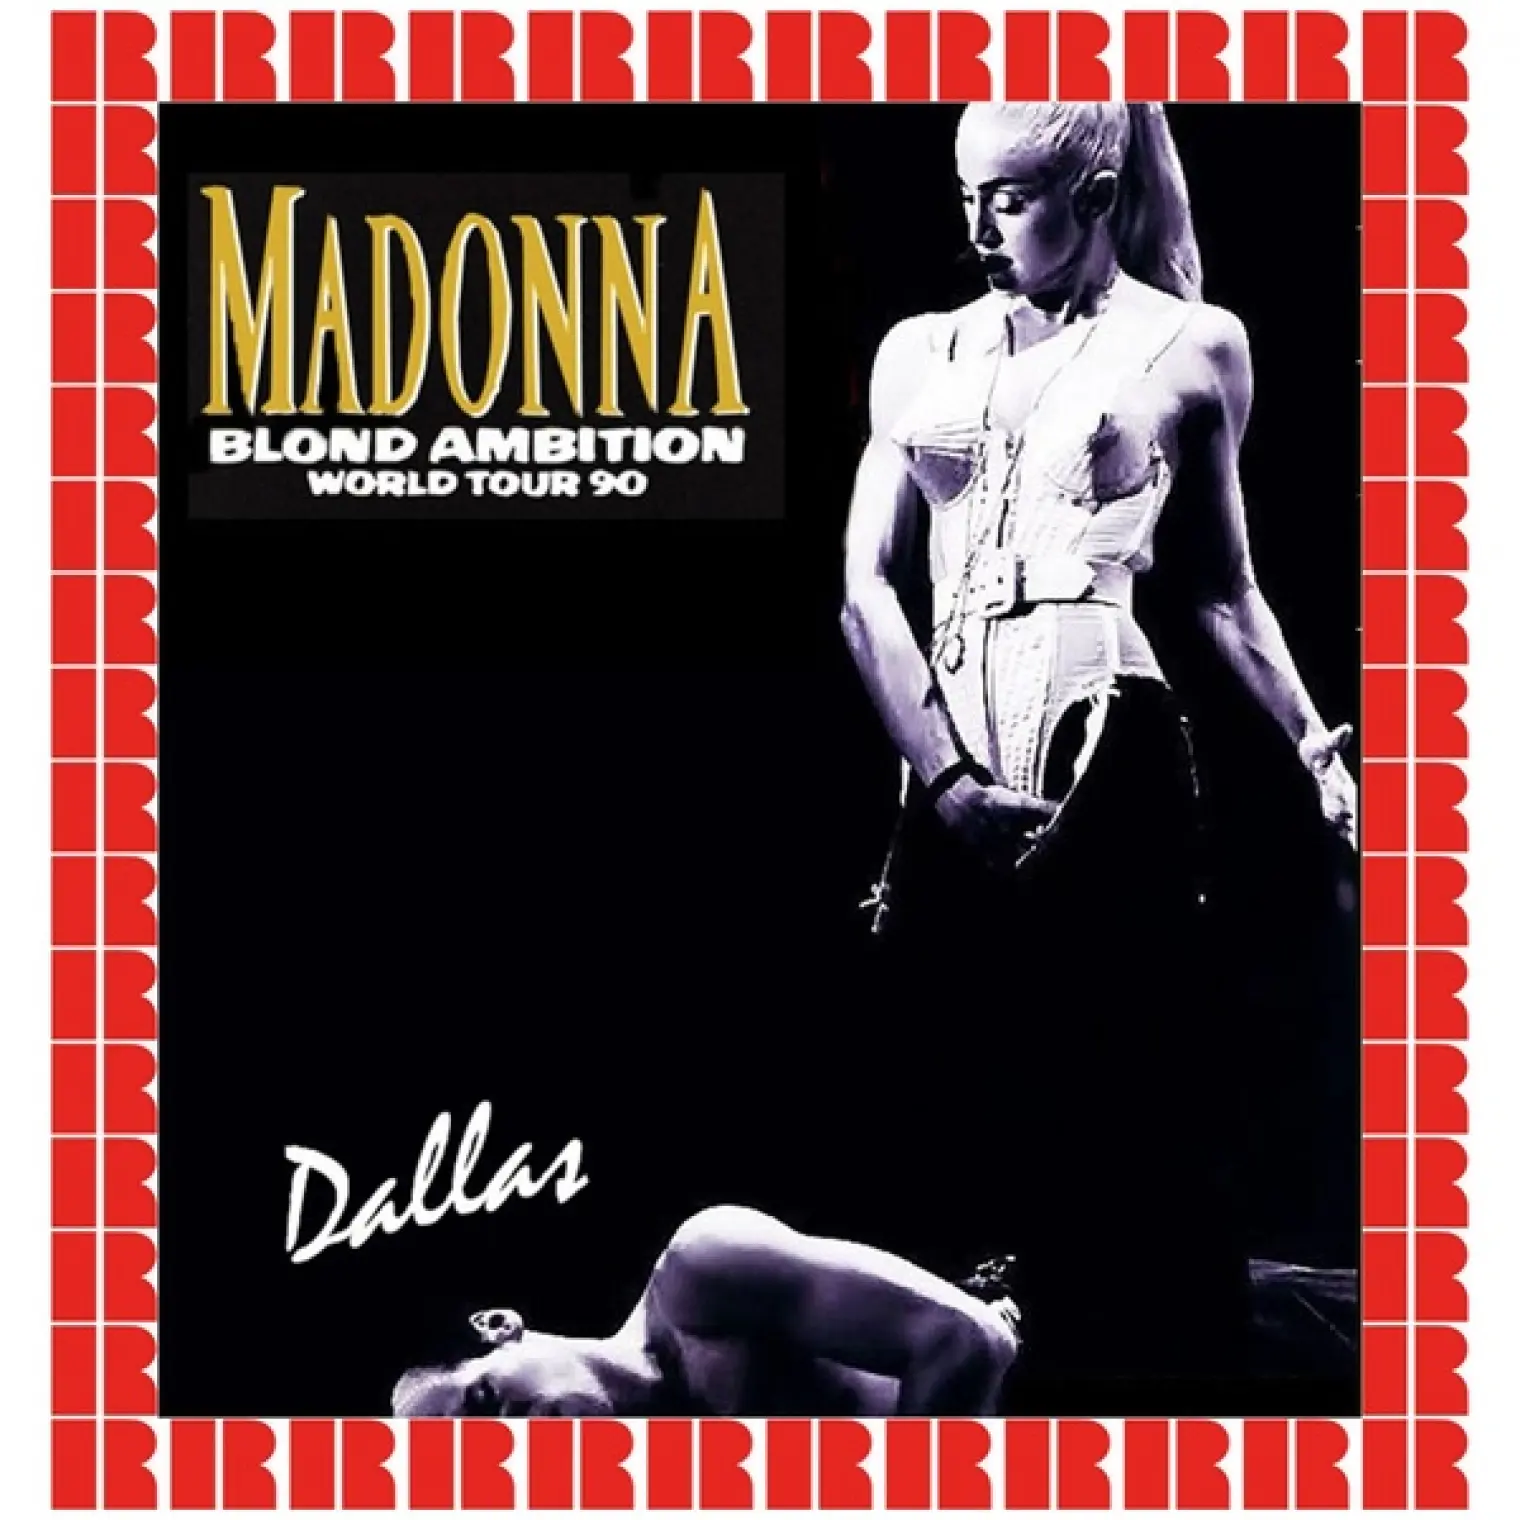 Blond Ambition World Tour, Dallas, May 7th, 1990 (Hd Remastered Version) -  Madonna 